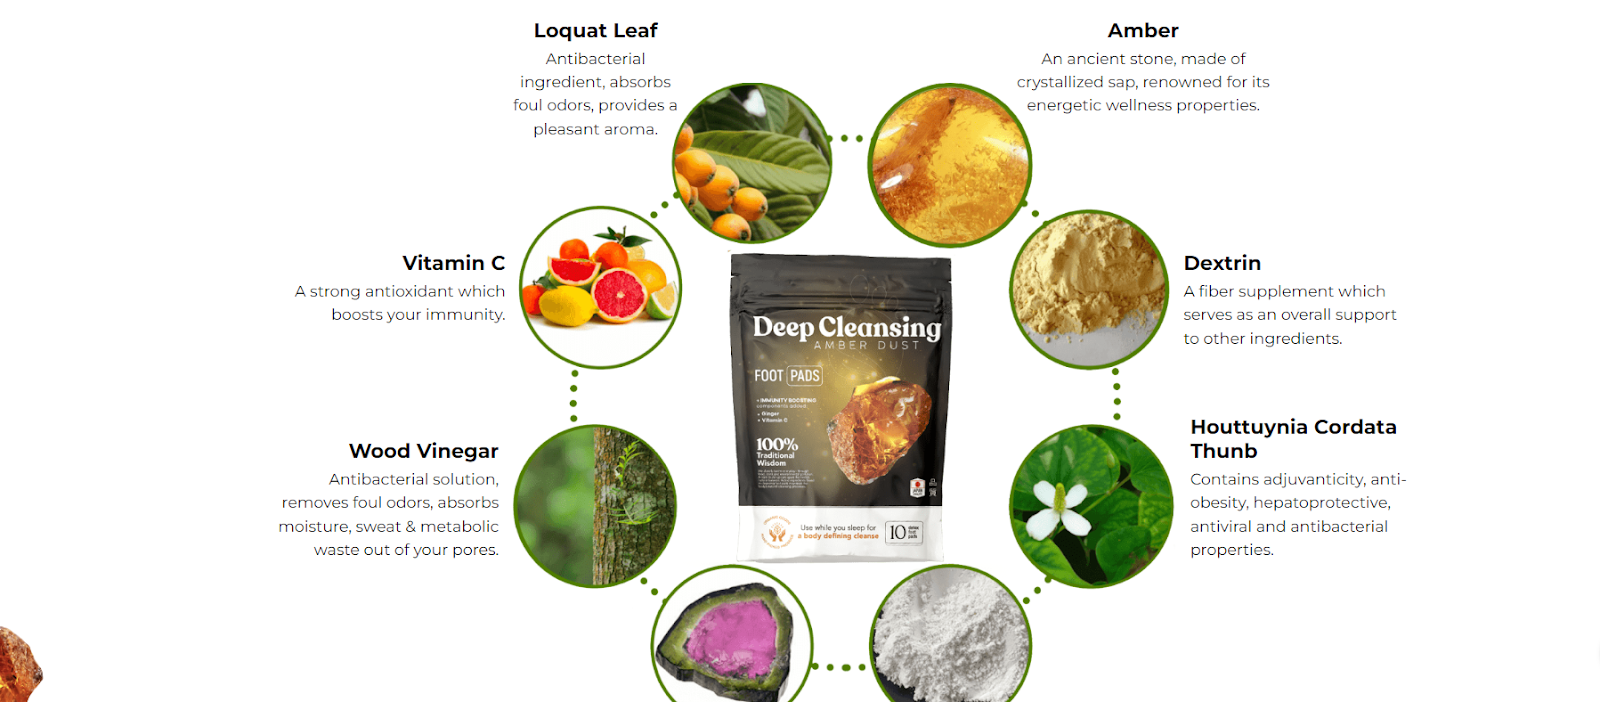 Amber detox patches ingredients